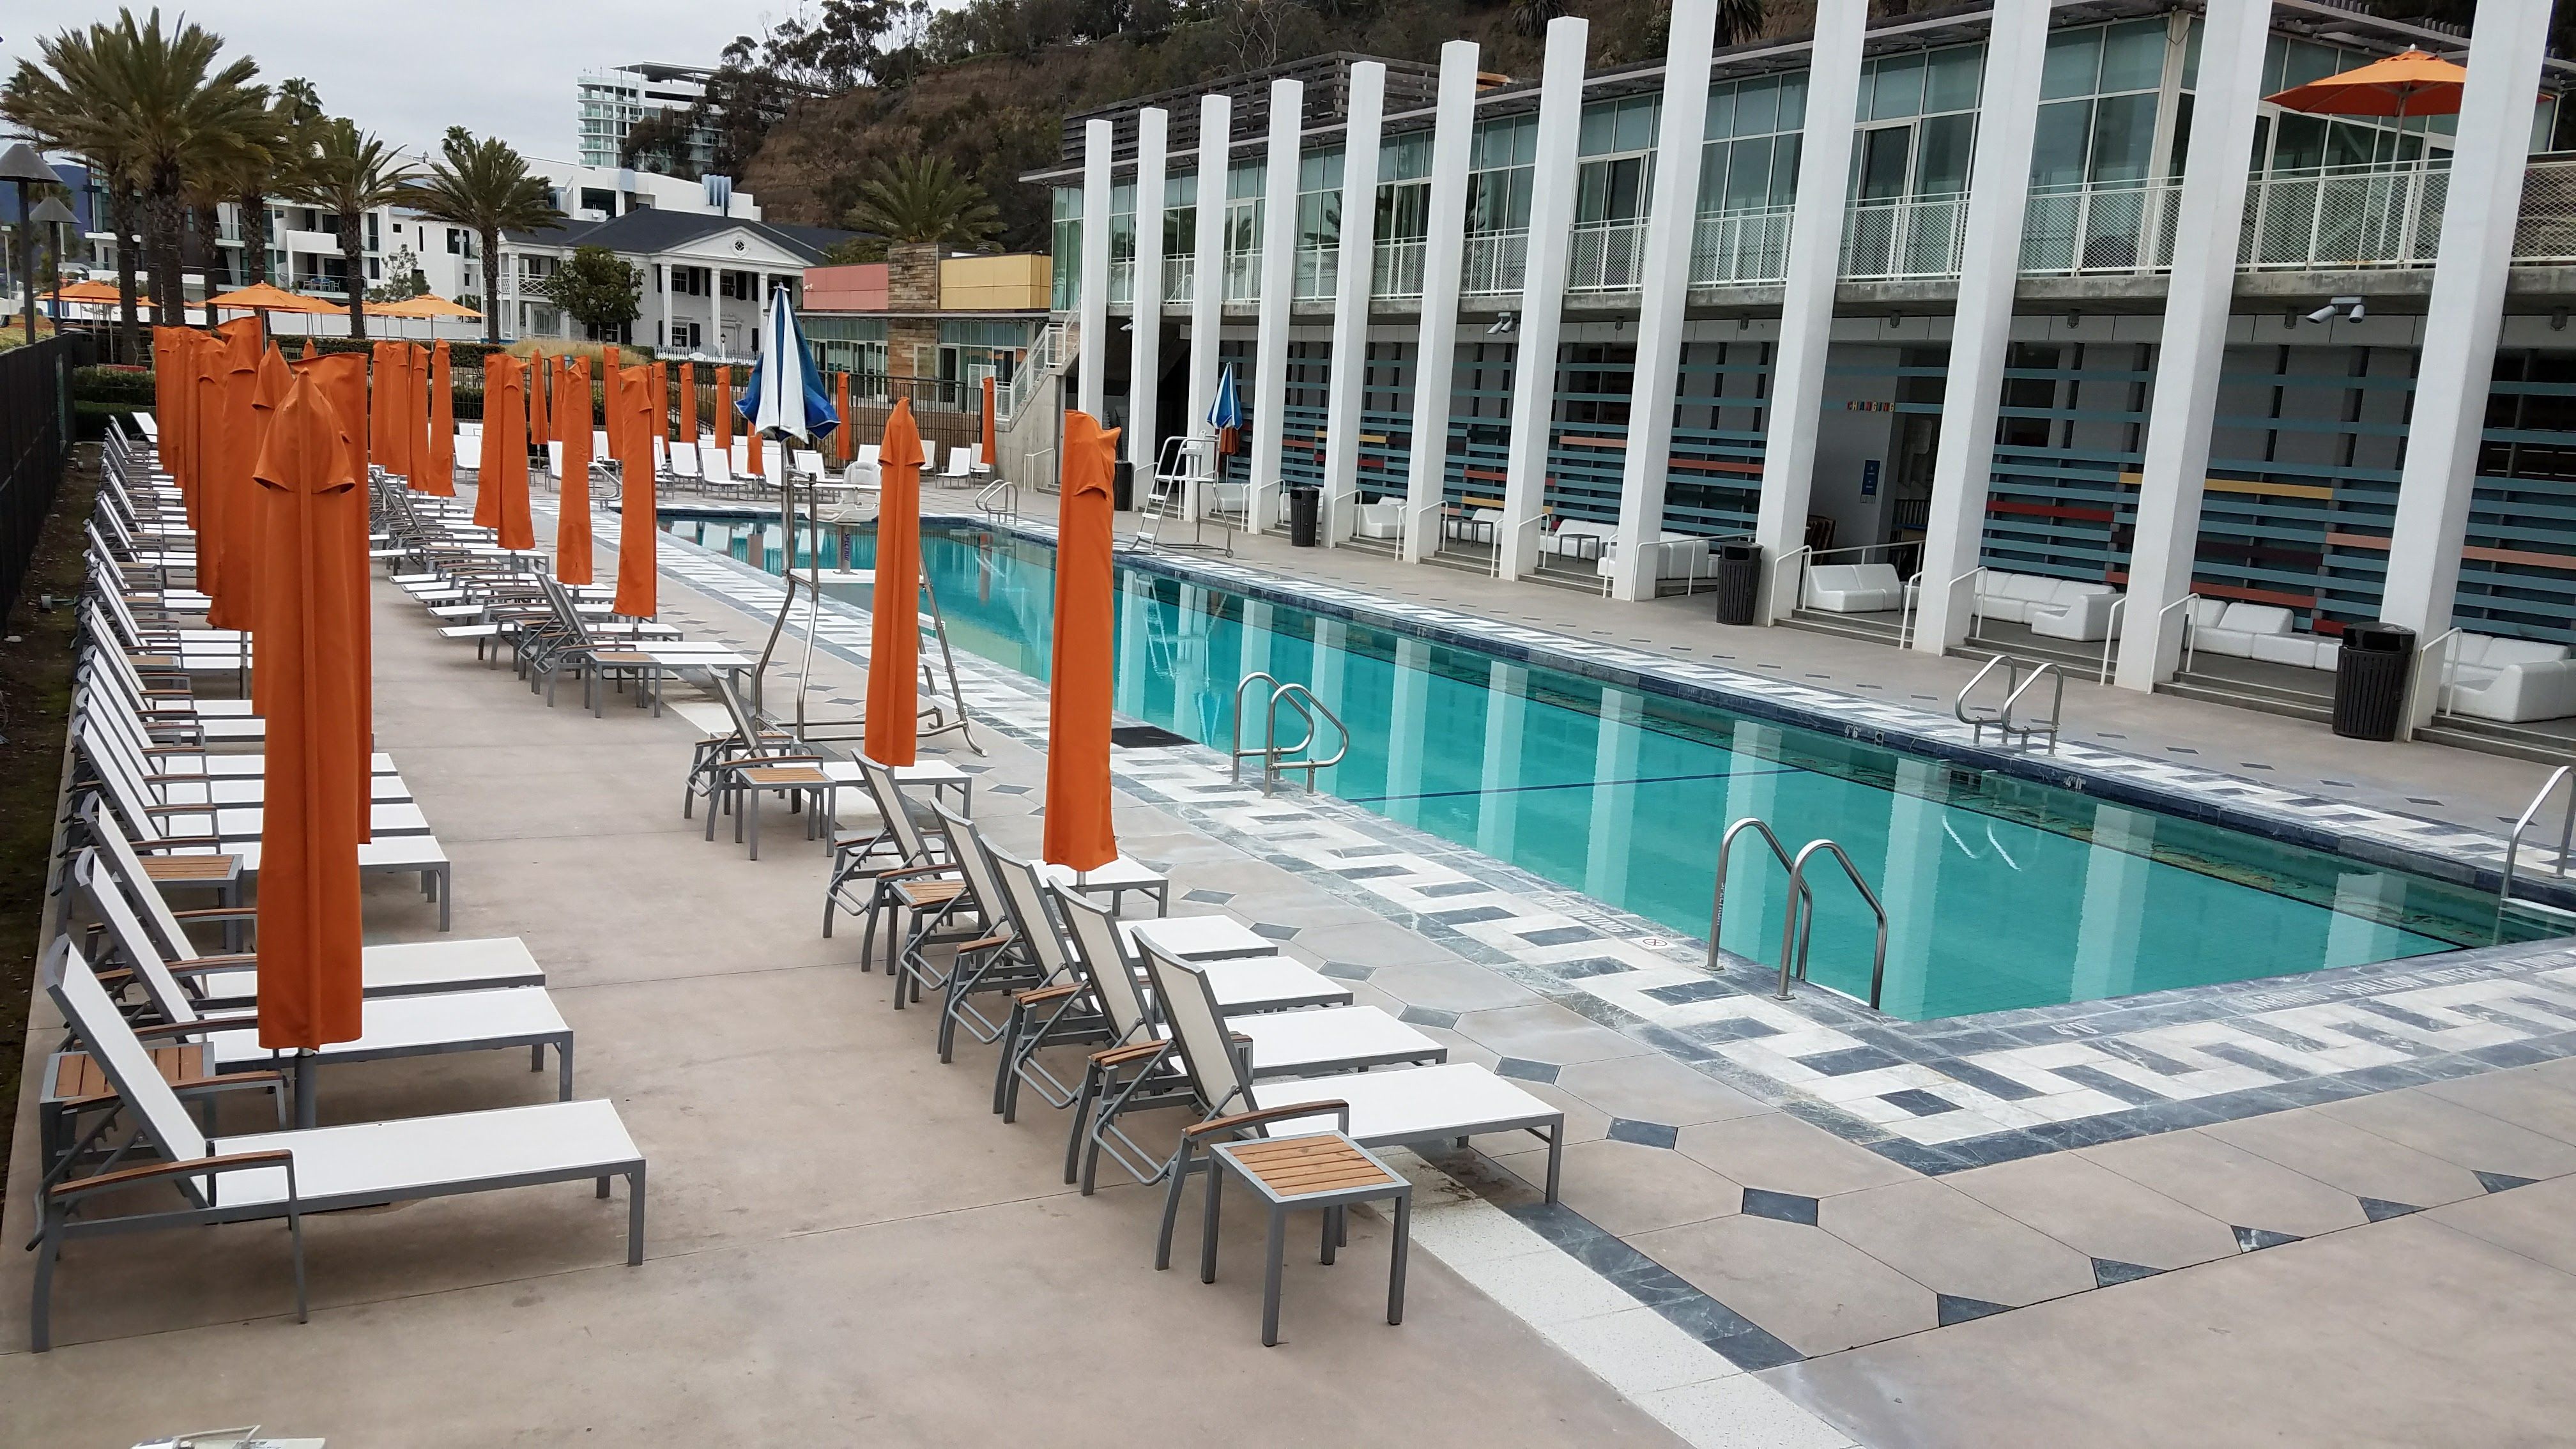 Caption: A photo of a pool surrounded by beach chairs and orange umbrellas at Annenberg Community Beach House in Santa Monica, California. (Local Guide Abbi Coursolle)